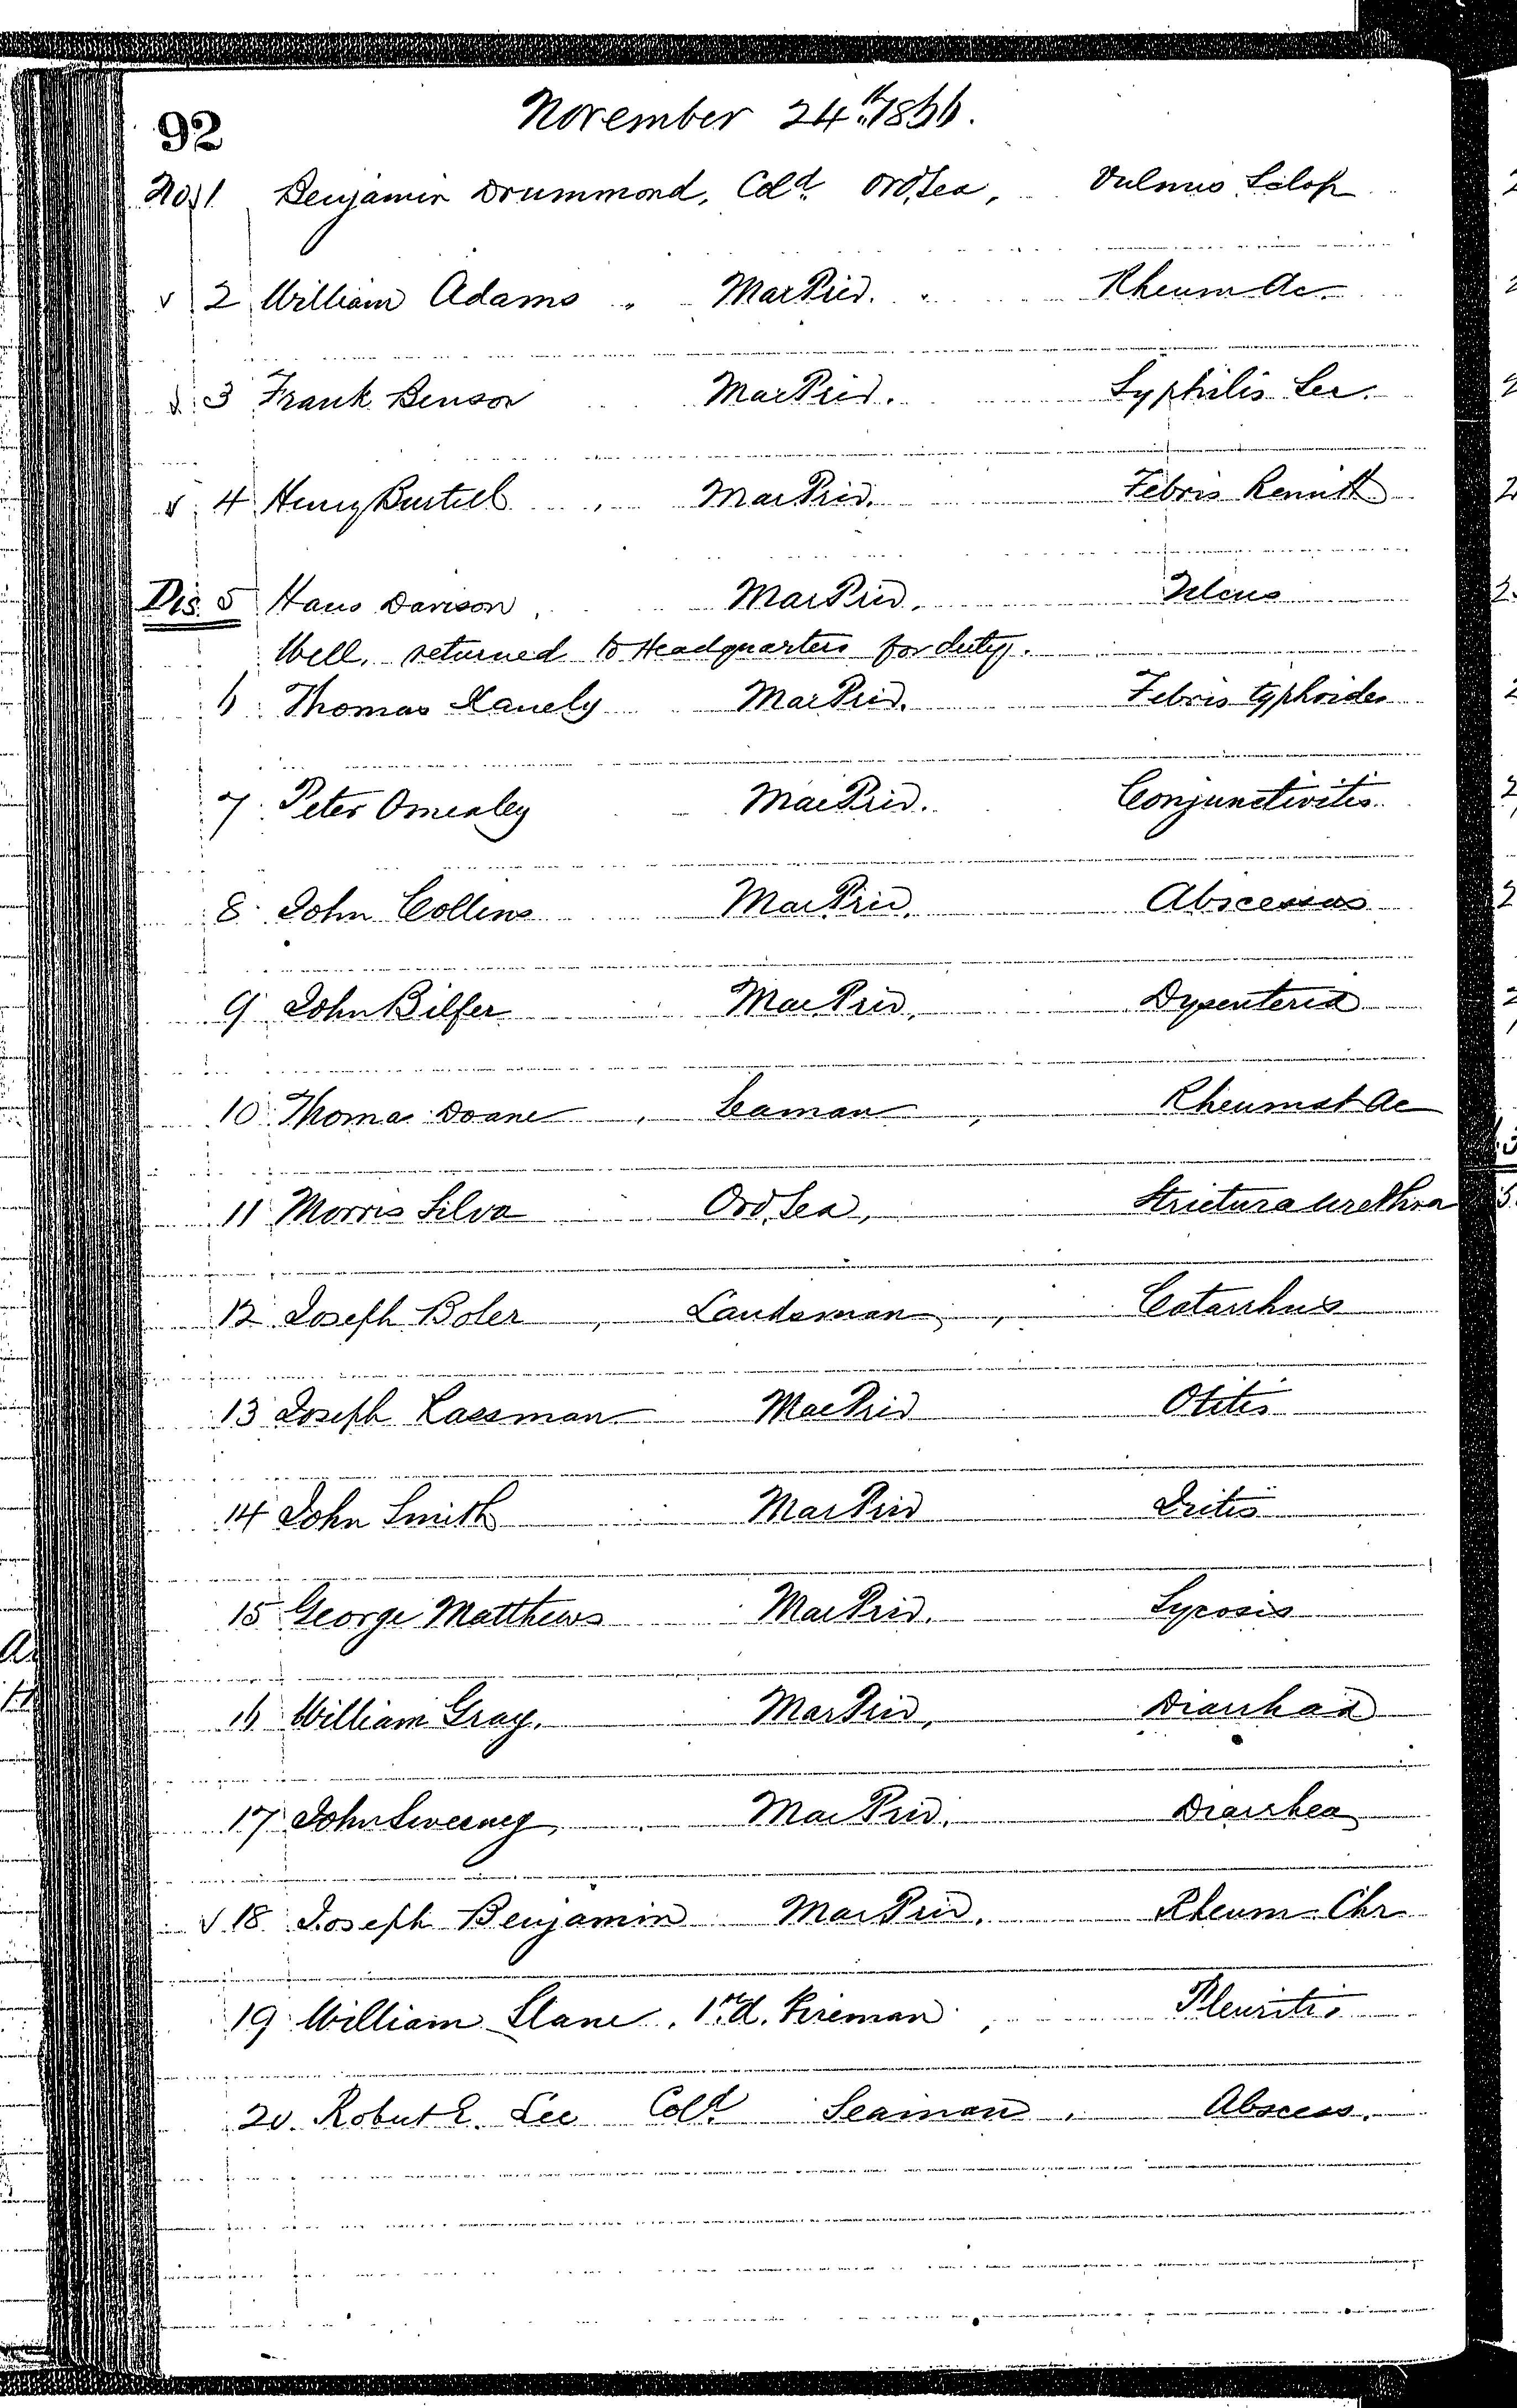 Patients in the Naval Hospital, Washington DC, on November 24, 1866, page 1 of 2, in the Medical Journal, October 1, 1866 to March 20, 1867